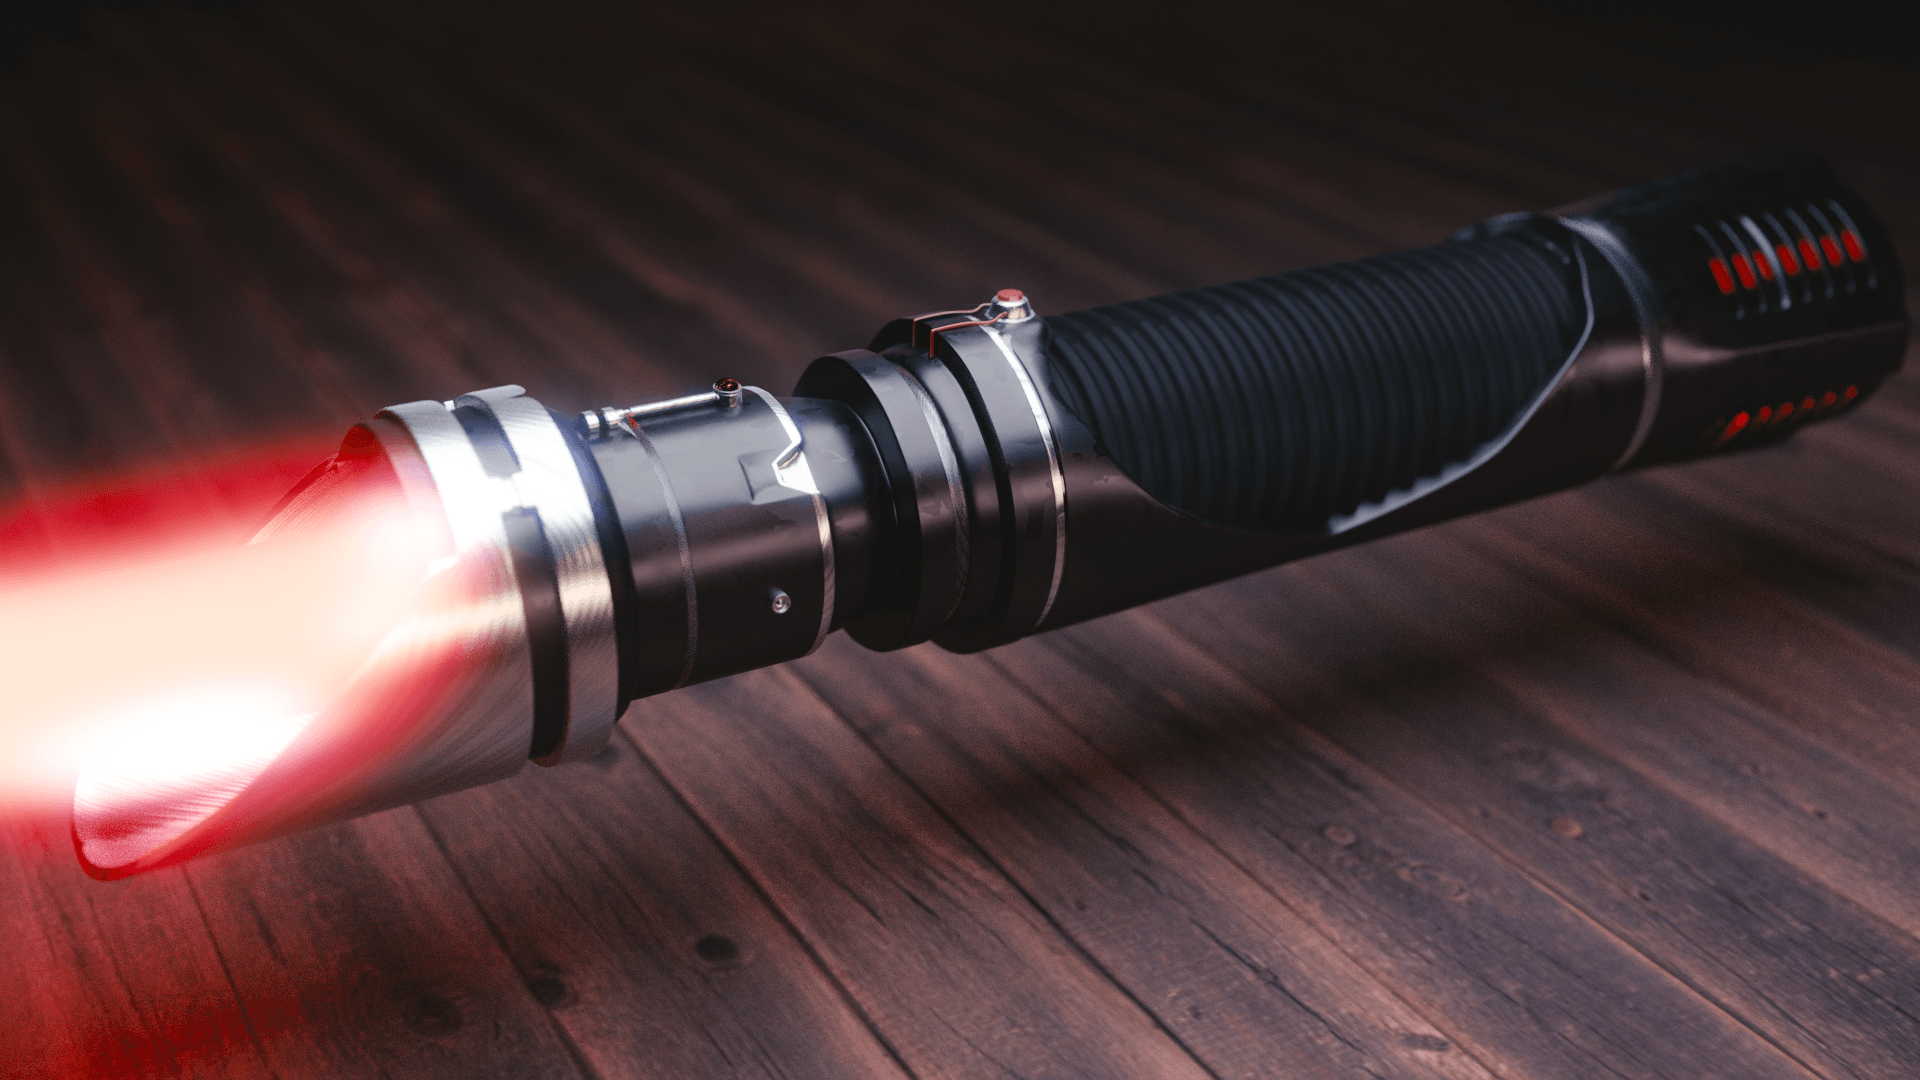 Made a lightsaber wallpaper, let me know how you folks like it